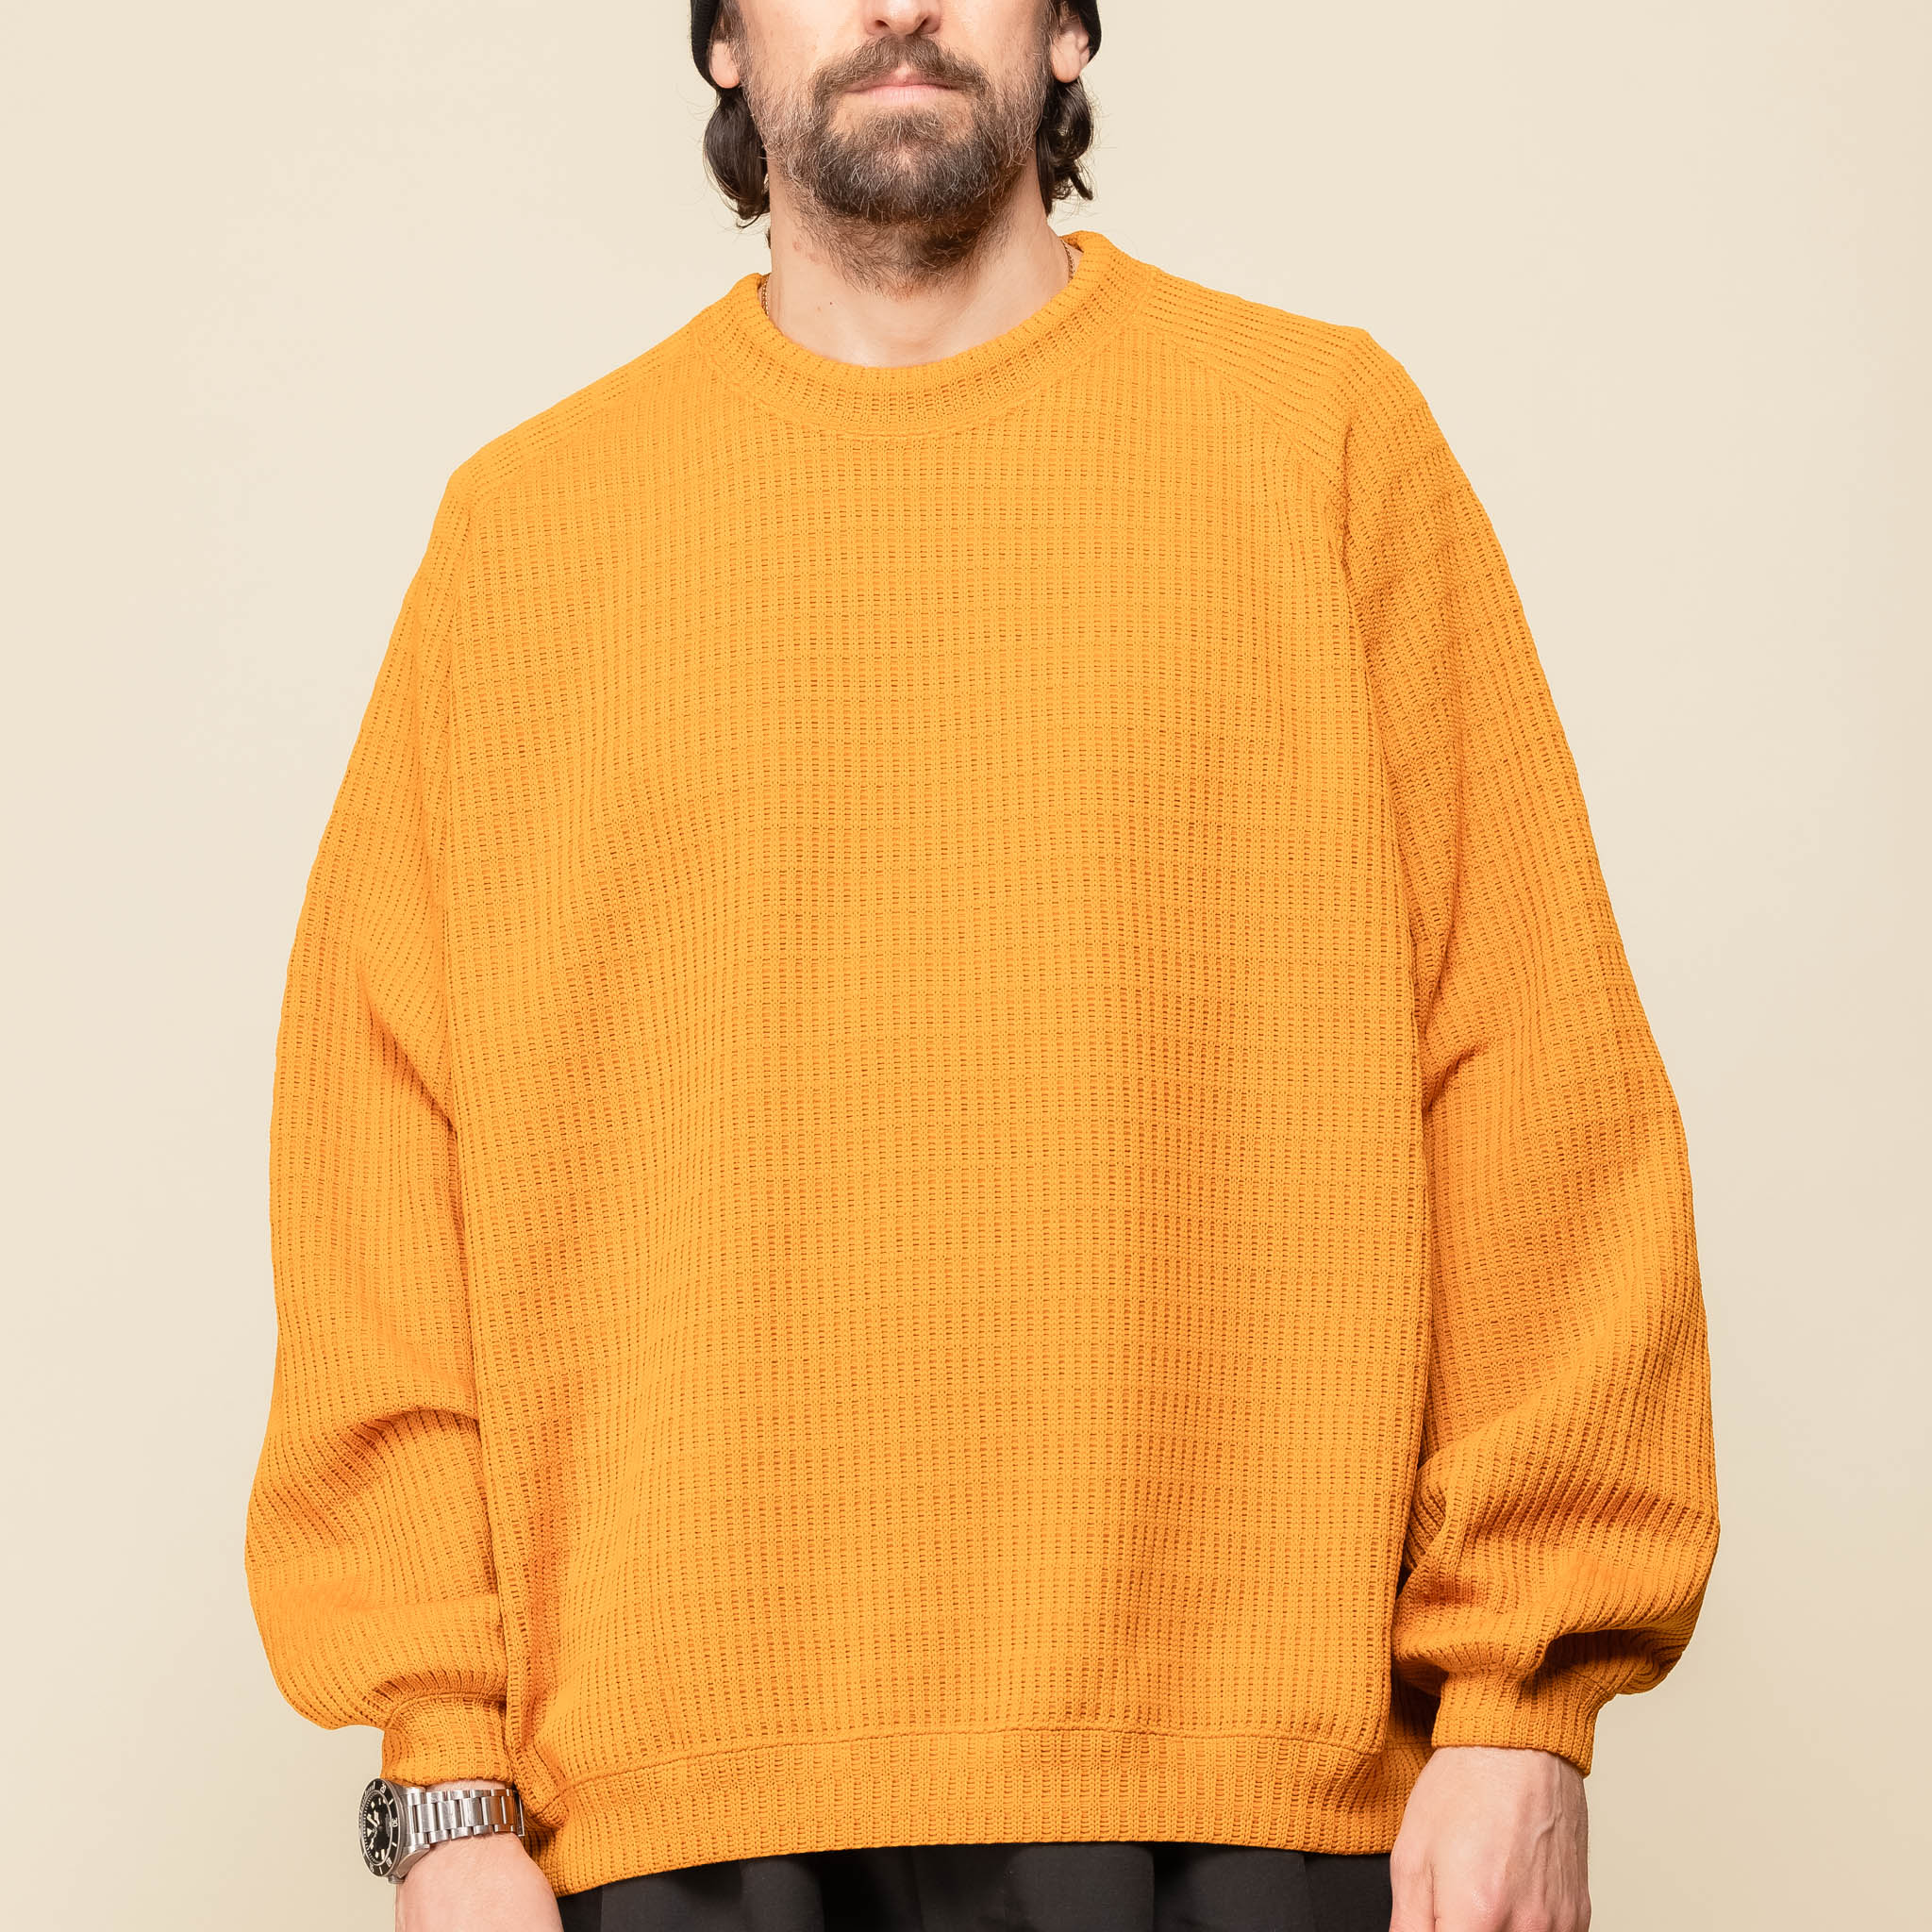 Tightbooth - Mystery Gauge Crew Knit Sweater - Mustard "tightbooth stockists" "tightbooth Japan"